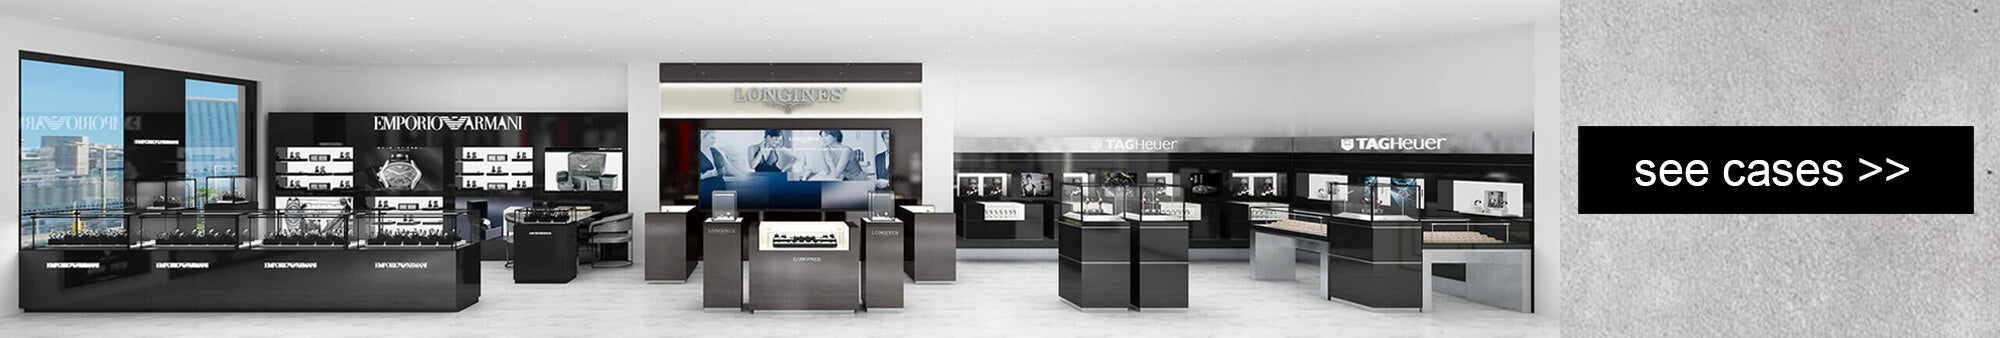 Check the Renderings of Longines Watch Shop Interior Design >>>